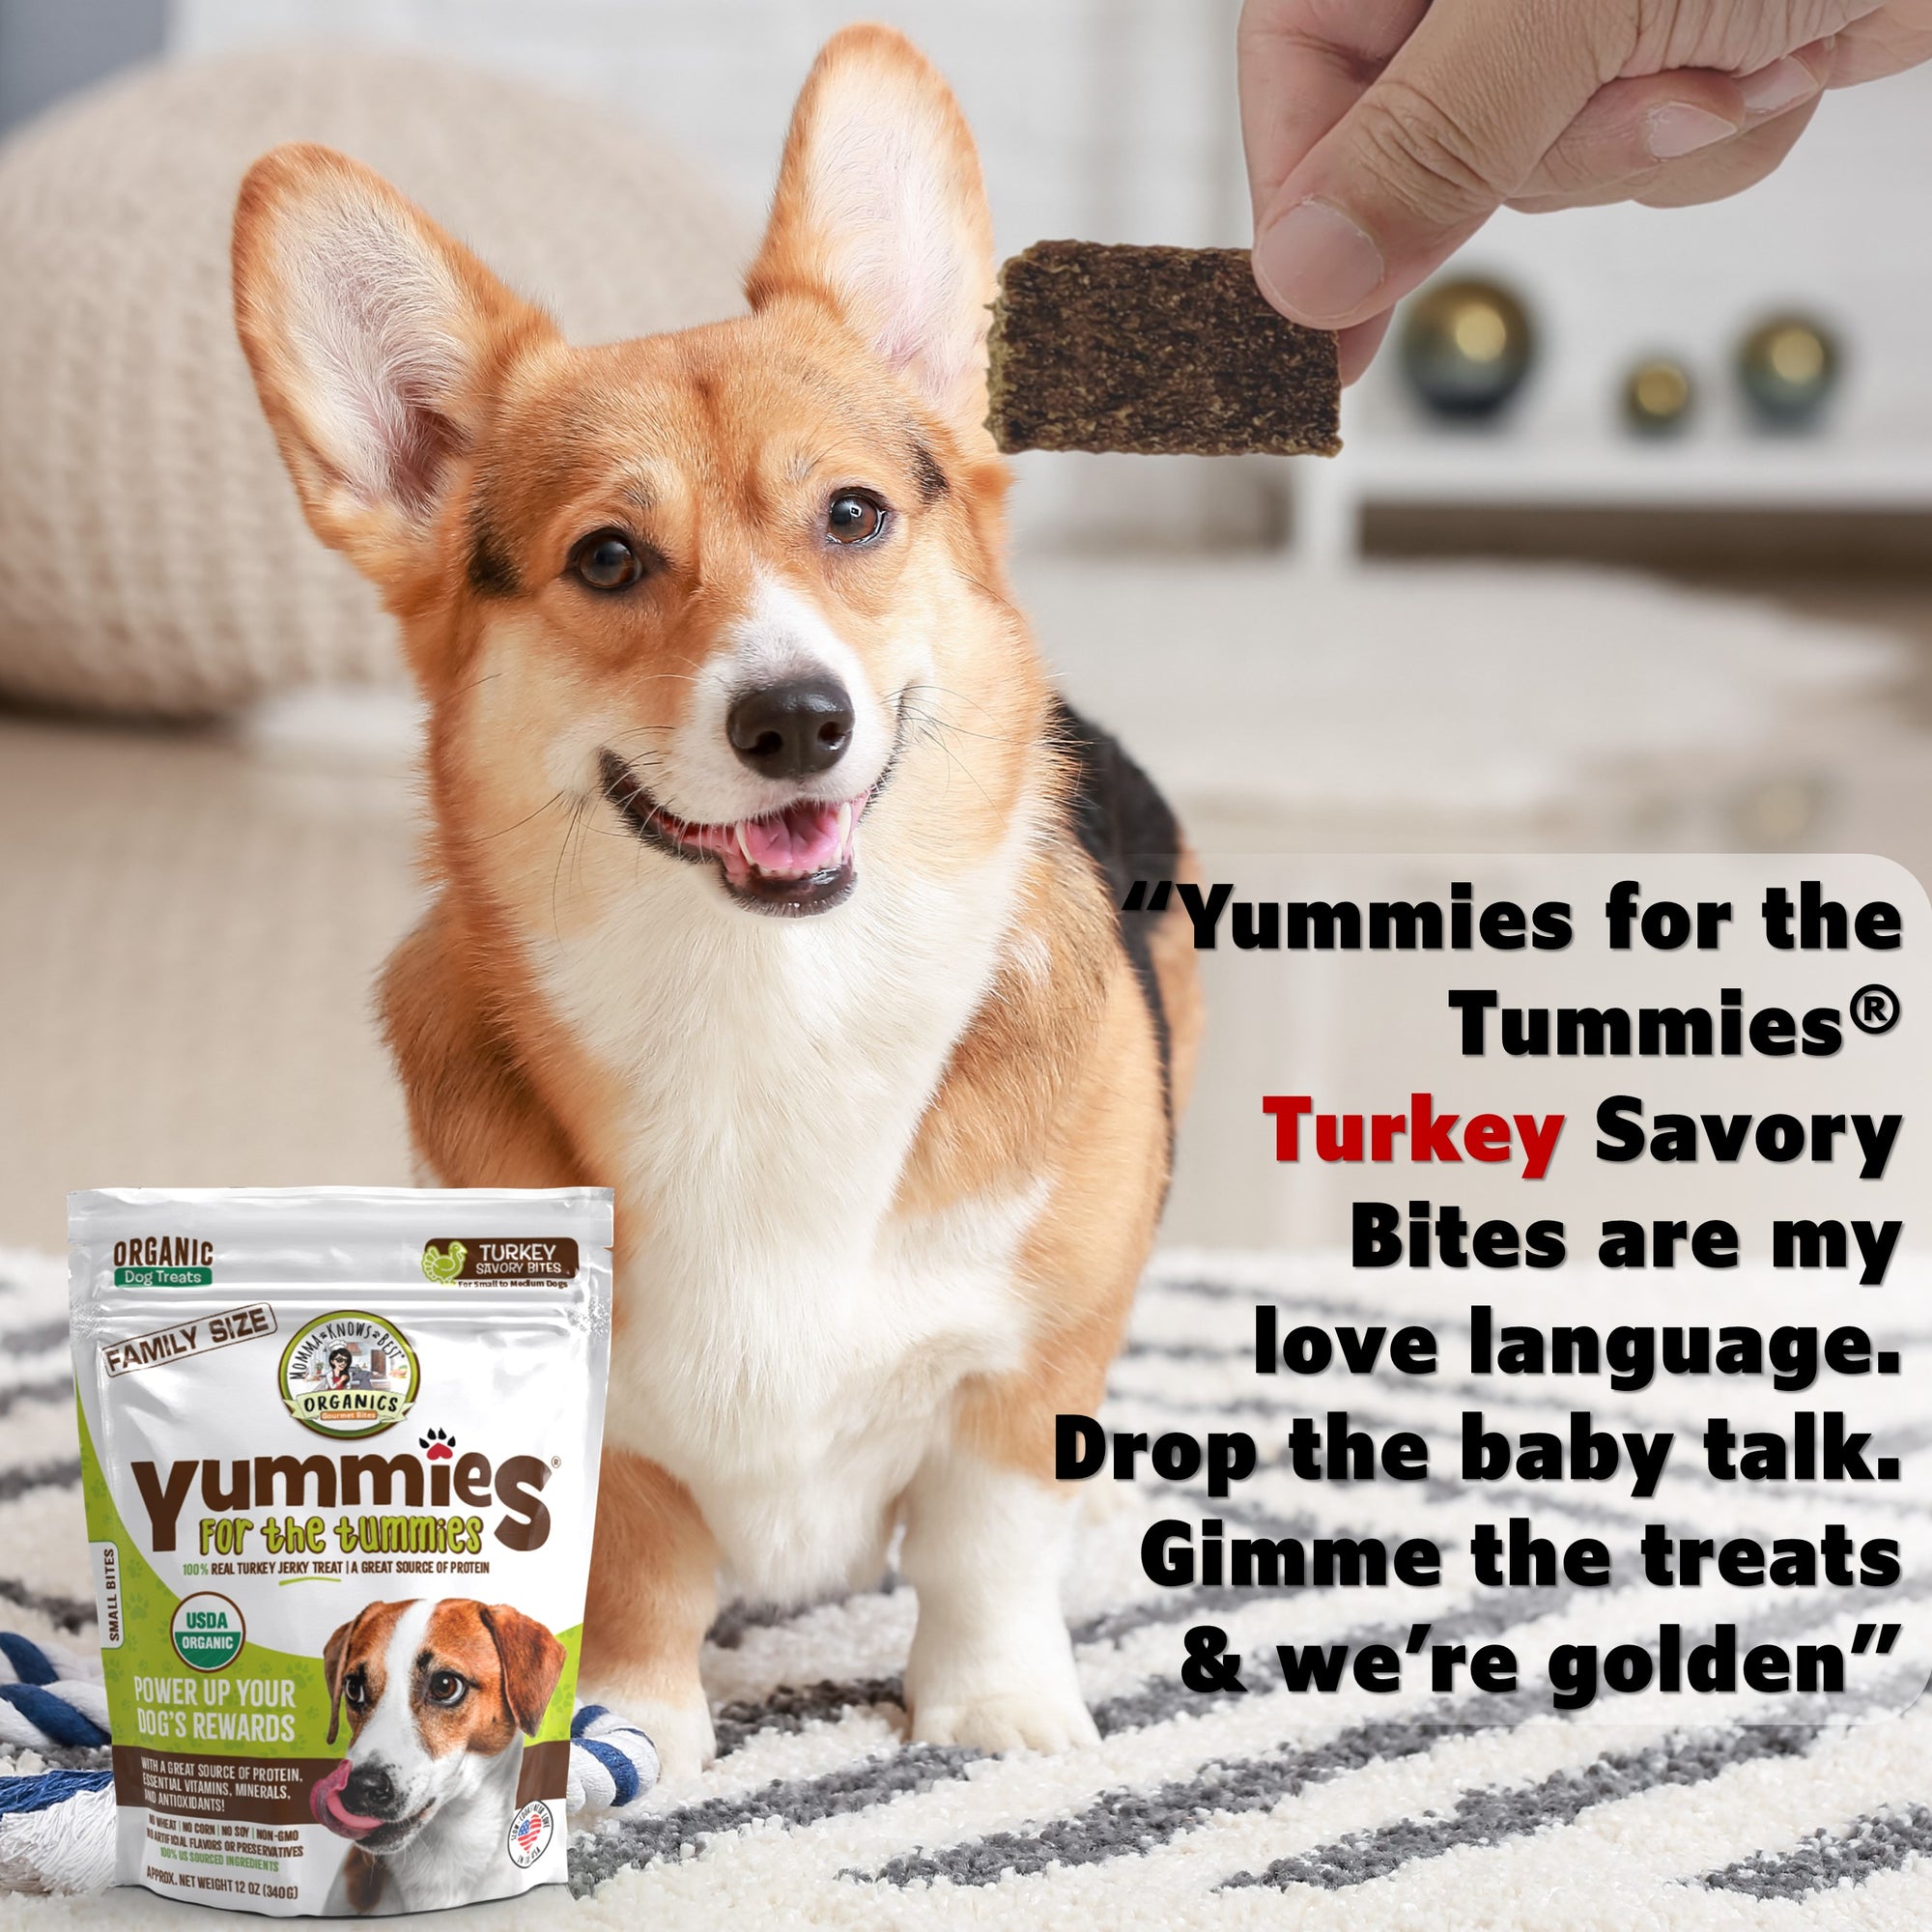 A dog standing on a rug staring at hand holding a meat-based organic turkey dog treat yummies for the tummies by Momma Knows Best